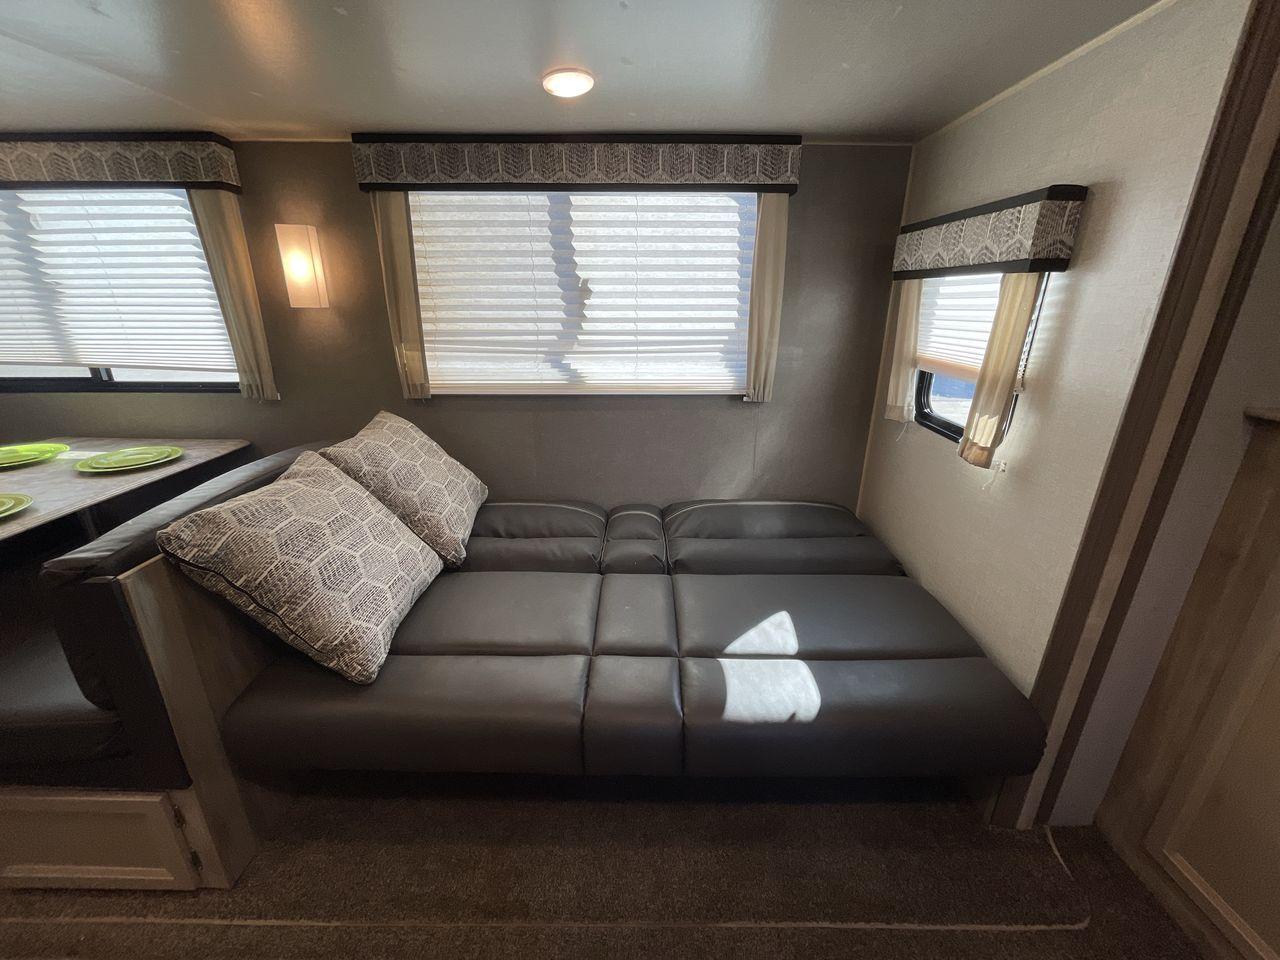 2021 COACHMEN CATALINA 243RBS (5ZT2CANBXMU) , Length: 28.75 ft. | Dry Weight: 5,692 lbs. | Gross Weight: 7,600 lbs. | Slides: 1 transmission, located at 4319 N Main Street, Cleburne, TX, 76033, (817) 221-0660, 32.435829, -97.384178 - The 2021 Forest River Catalina 243RBS travel trailer offers a spacious floorplan that is truly comfortable and convenient. As you enter the trailer, you will find a cozy front bedroom with a lovely queen bed where you can relax and rejuvenate yourself after enjoying the great outdoors. You also have - Photo #19